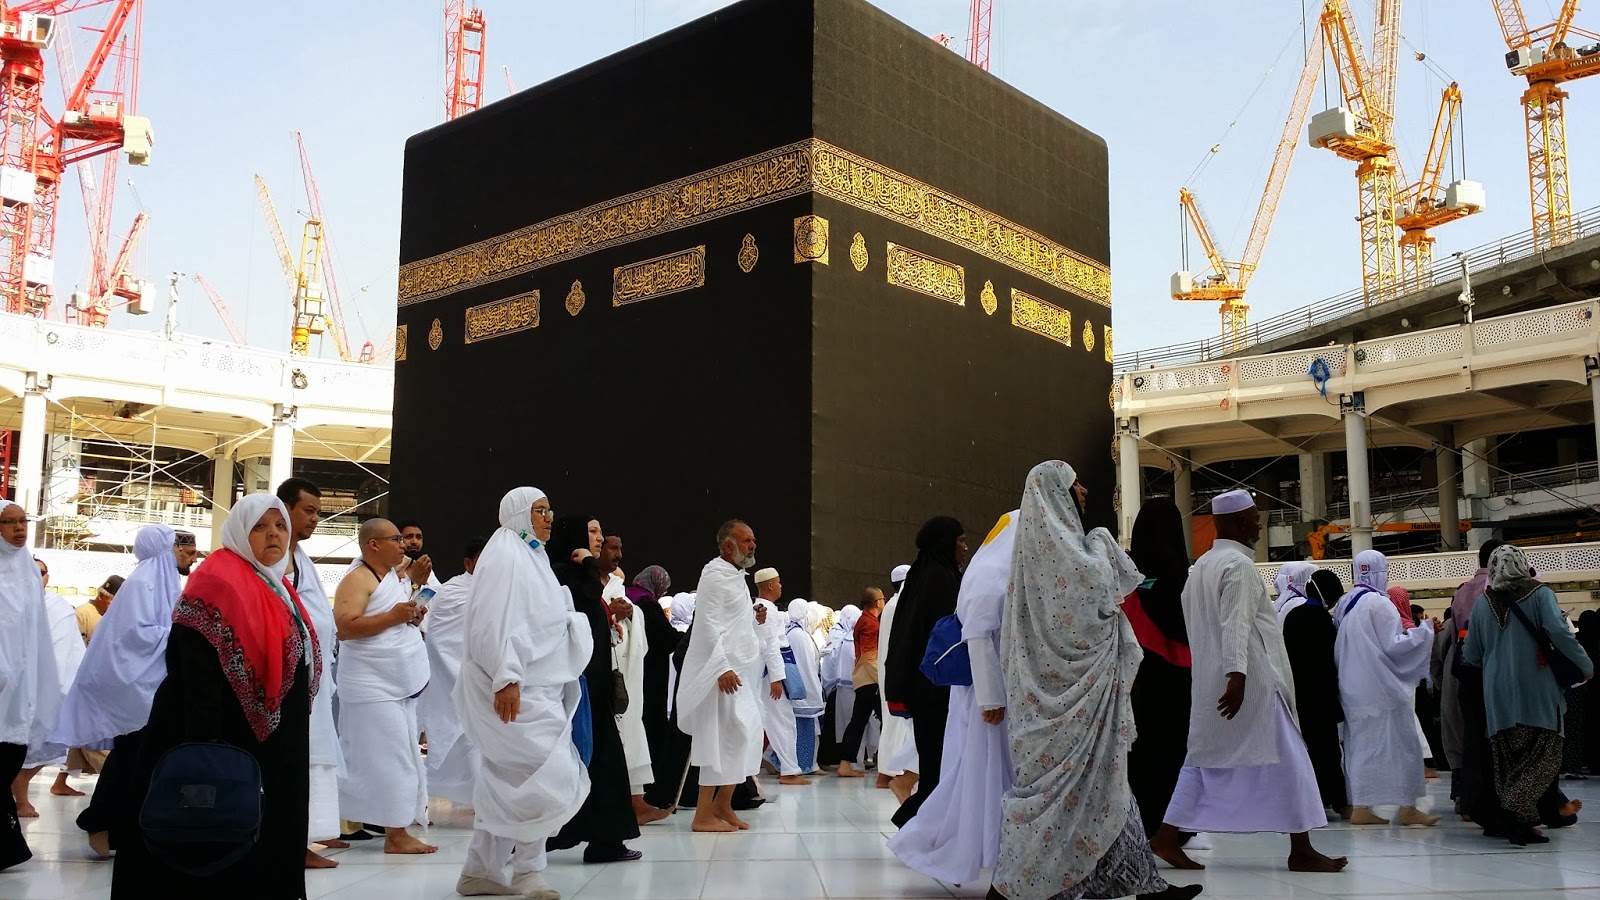 The best time to perform Umrah in Makkah and Madinah